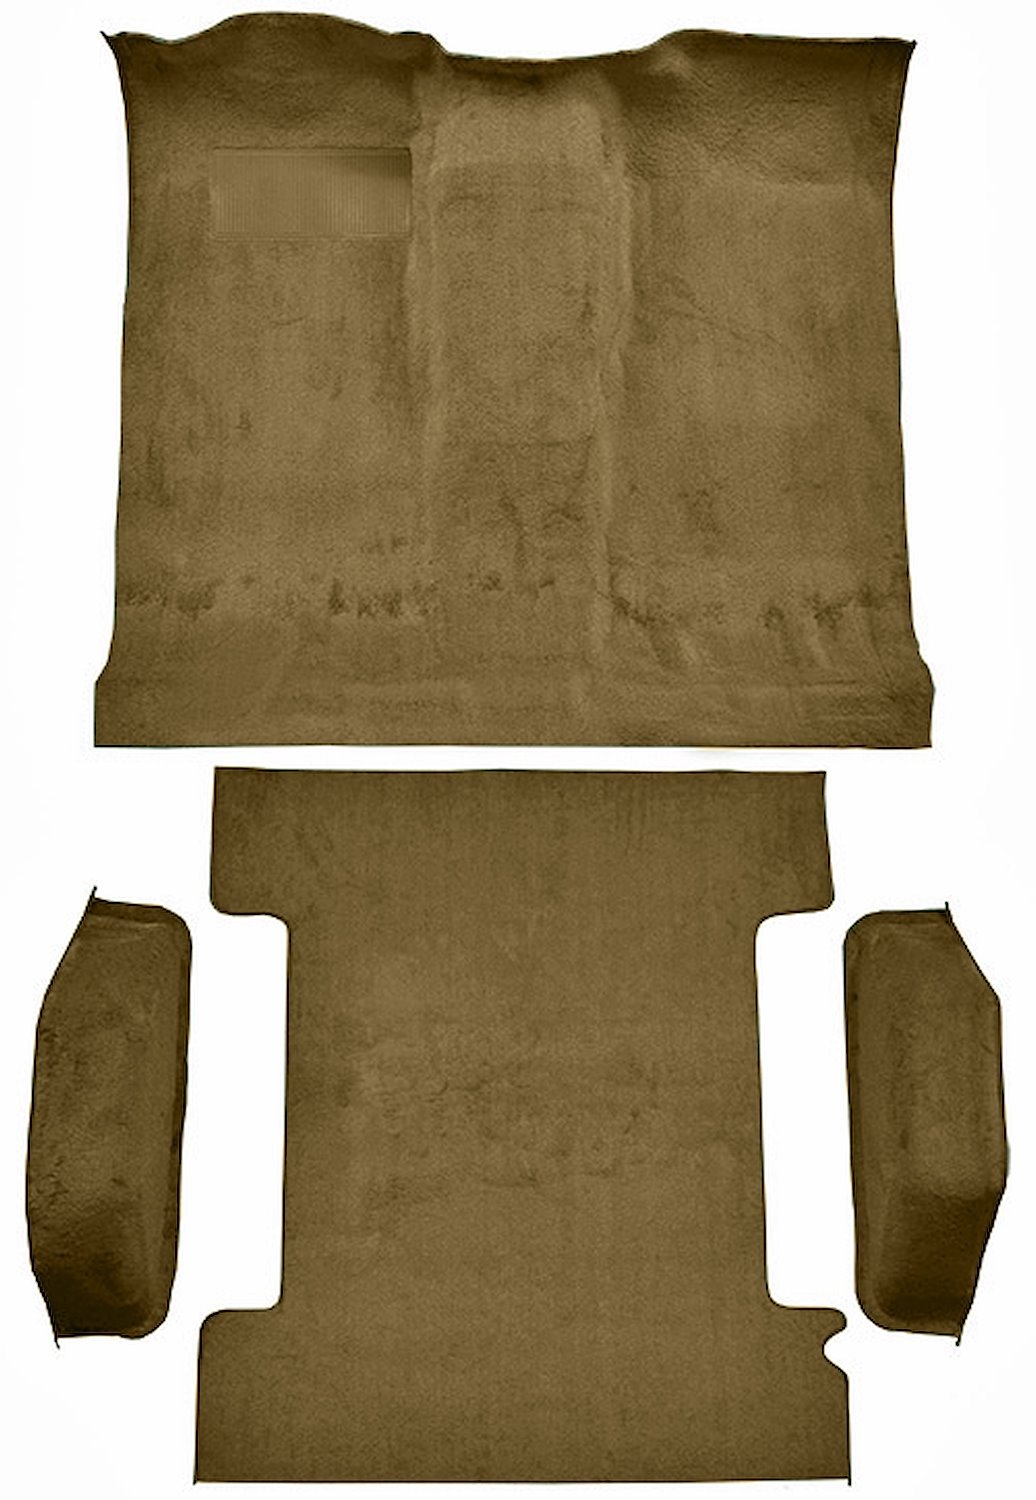 Molded Cut Pile Passenger and Cargo Area Carpet for 1974-1977 Chevy Blazer, GMC Jimmy [Mass Backing, 4-Piece, Caramel]